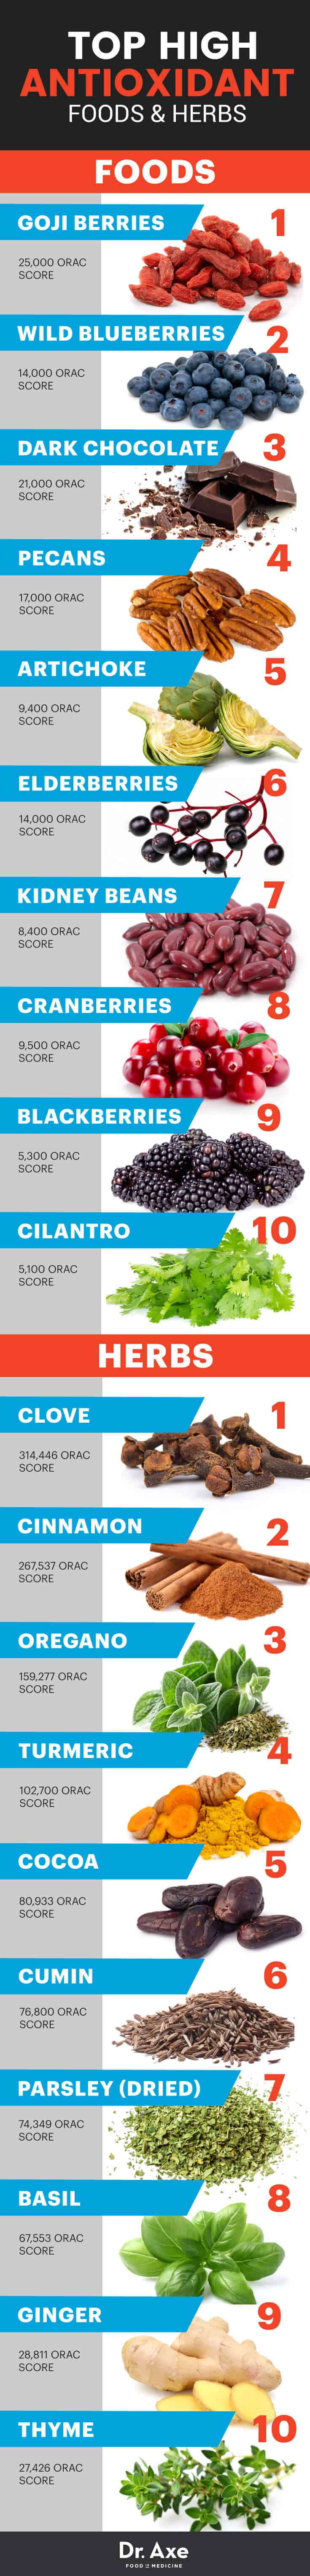 Top high antioxidant foods and herbs - Dr. Axe